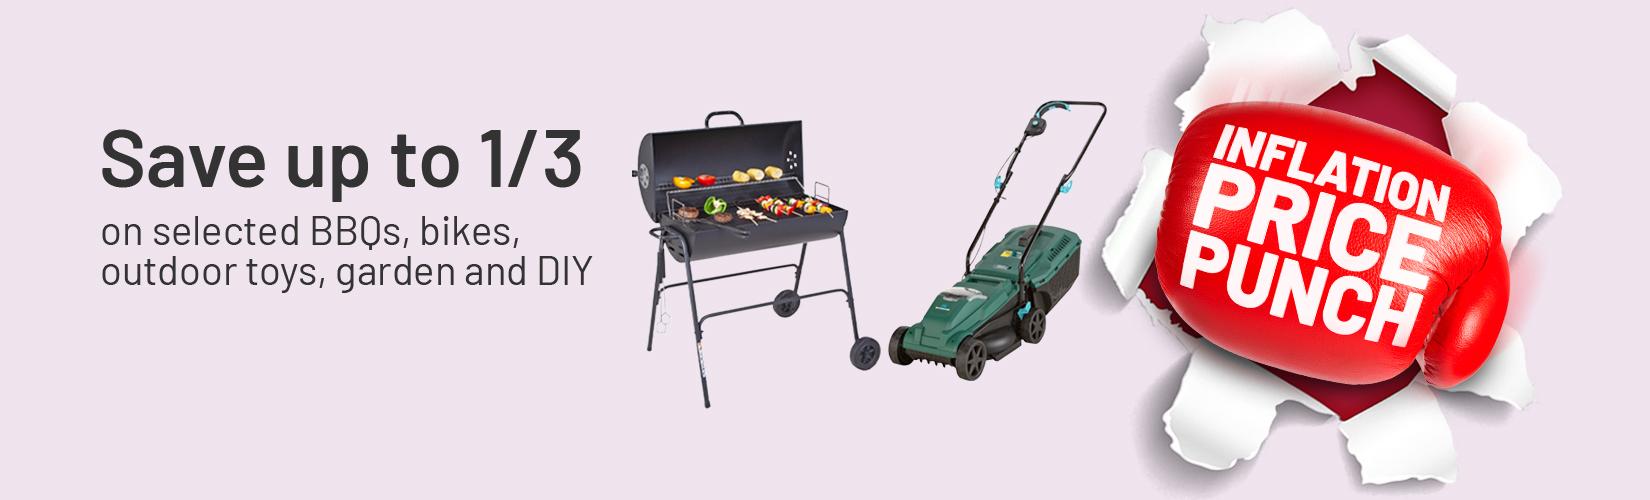 Save up to 1/3 on selected BBQs, bikes, outdoor toys, garden and DIY.